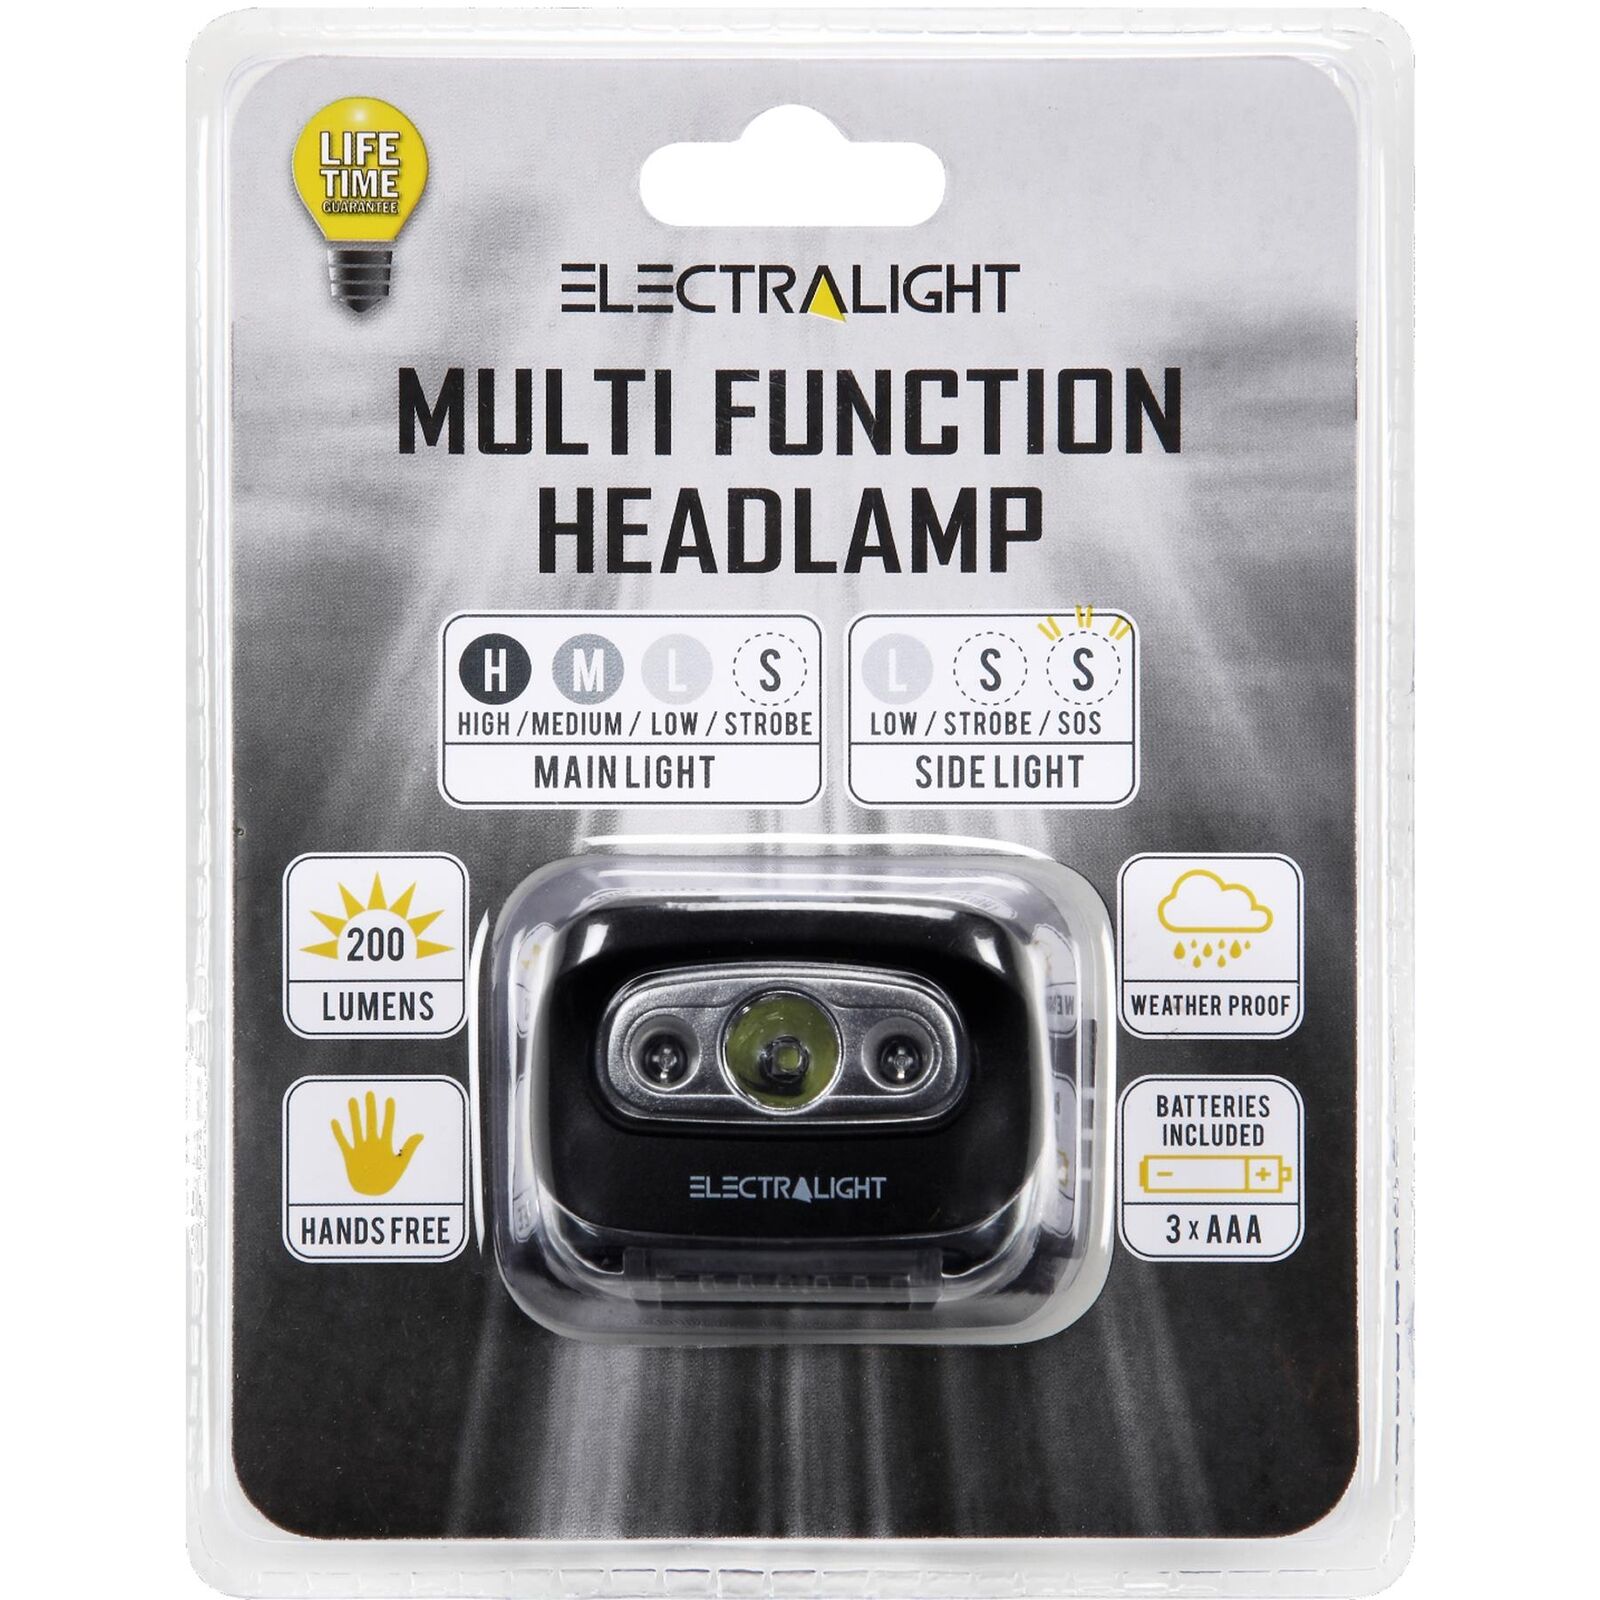 Electralight Cob Led Head Torch Multi-function Headlamp 200 Lumen With Batteries